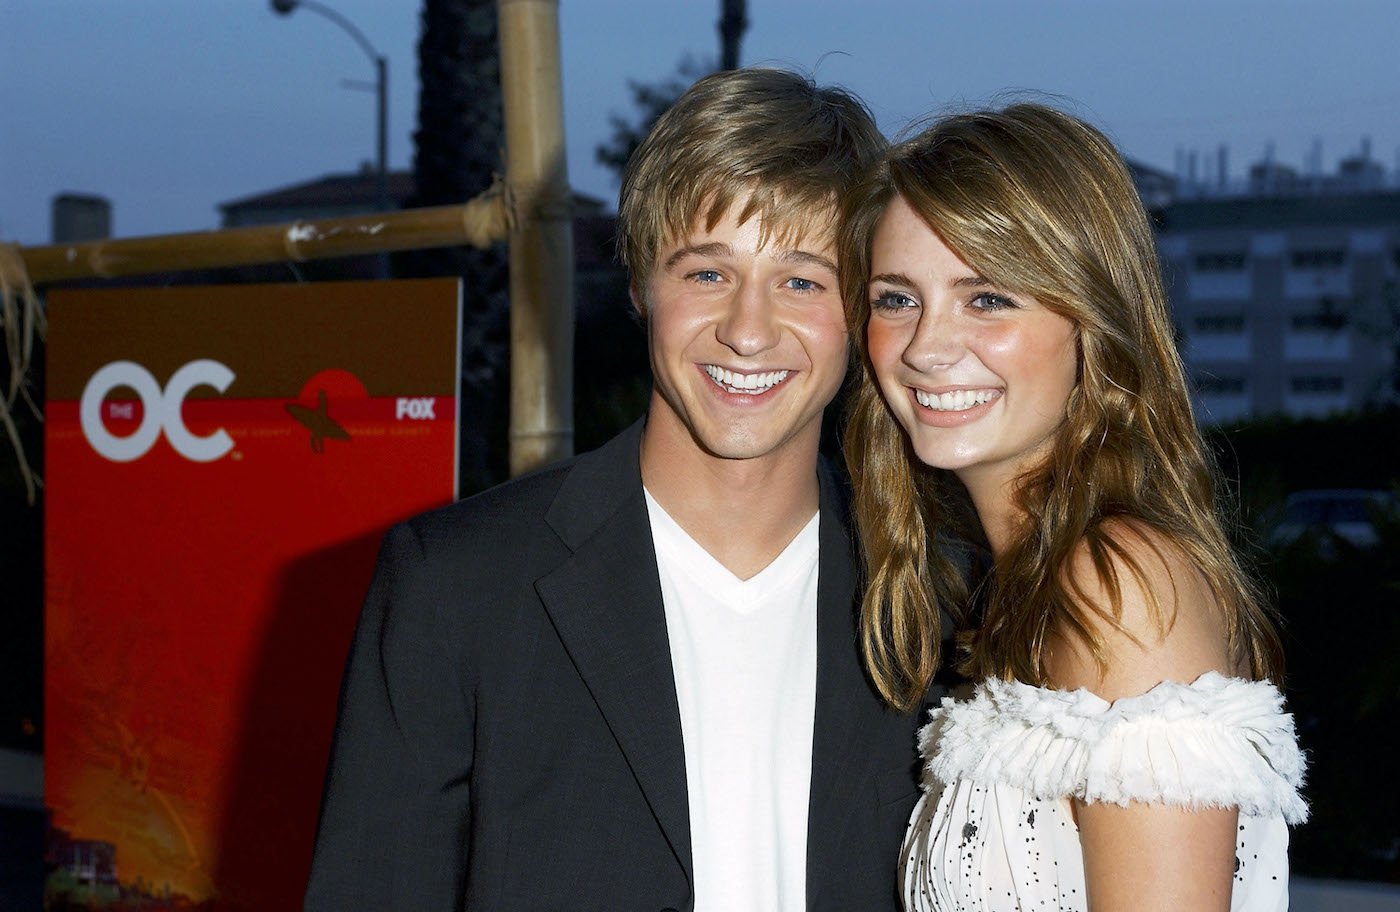 Ben McKenzie and Mischa Barton arrive at a premiere party for 'The O.C.'